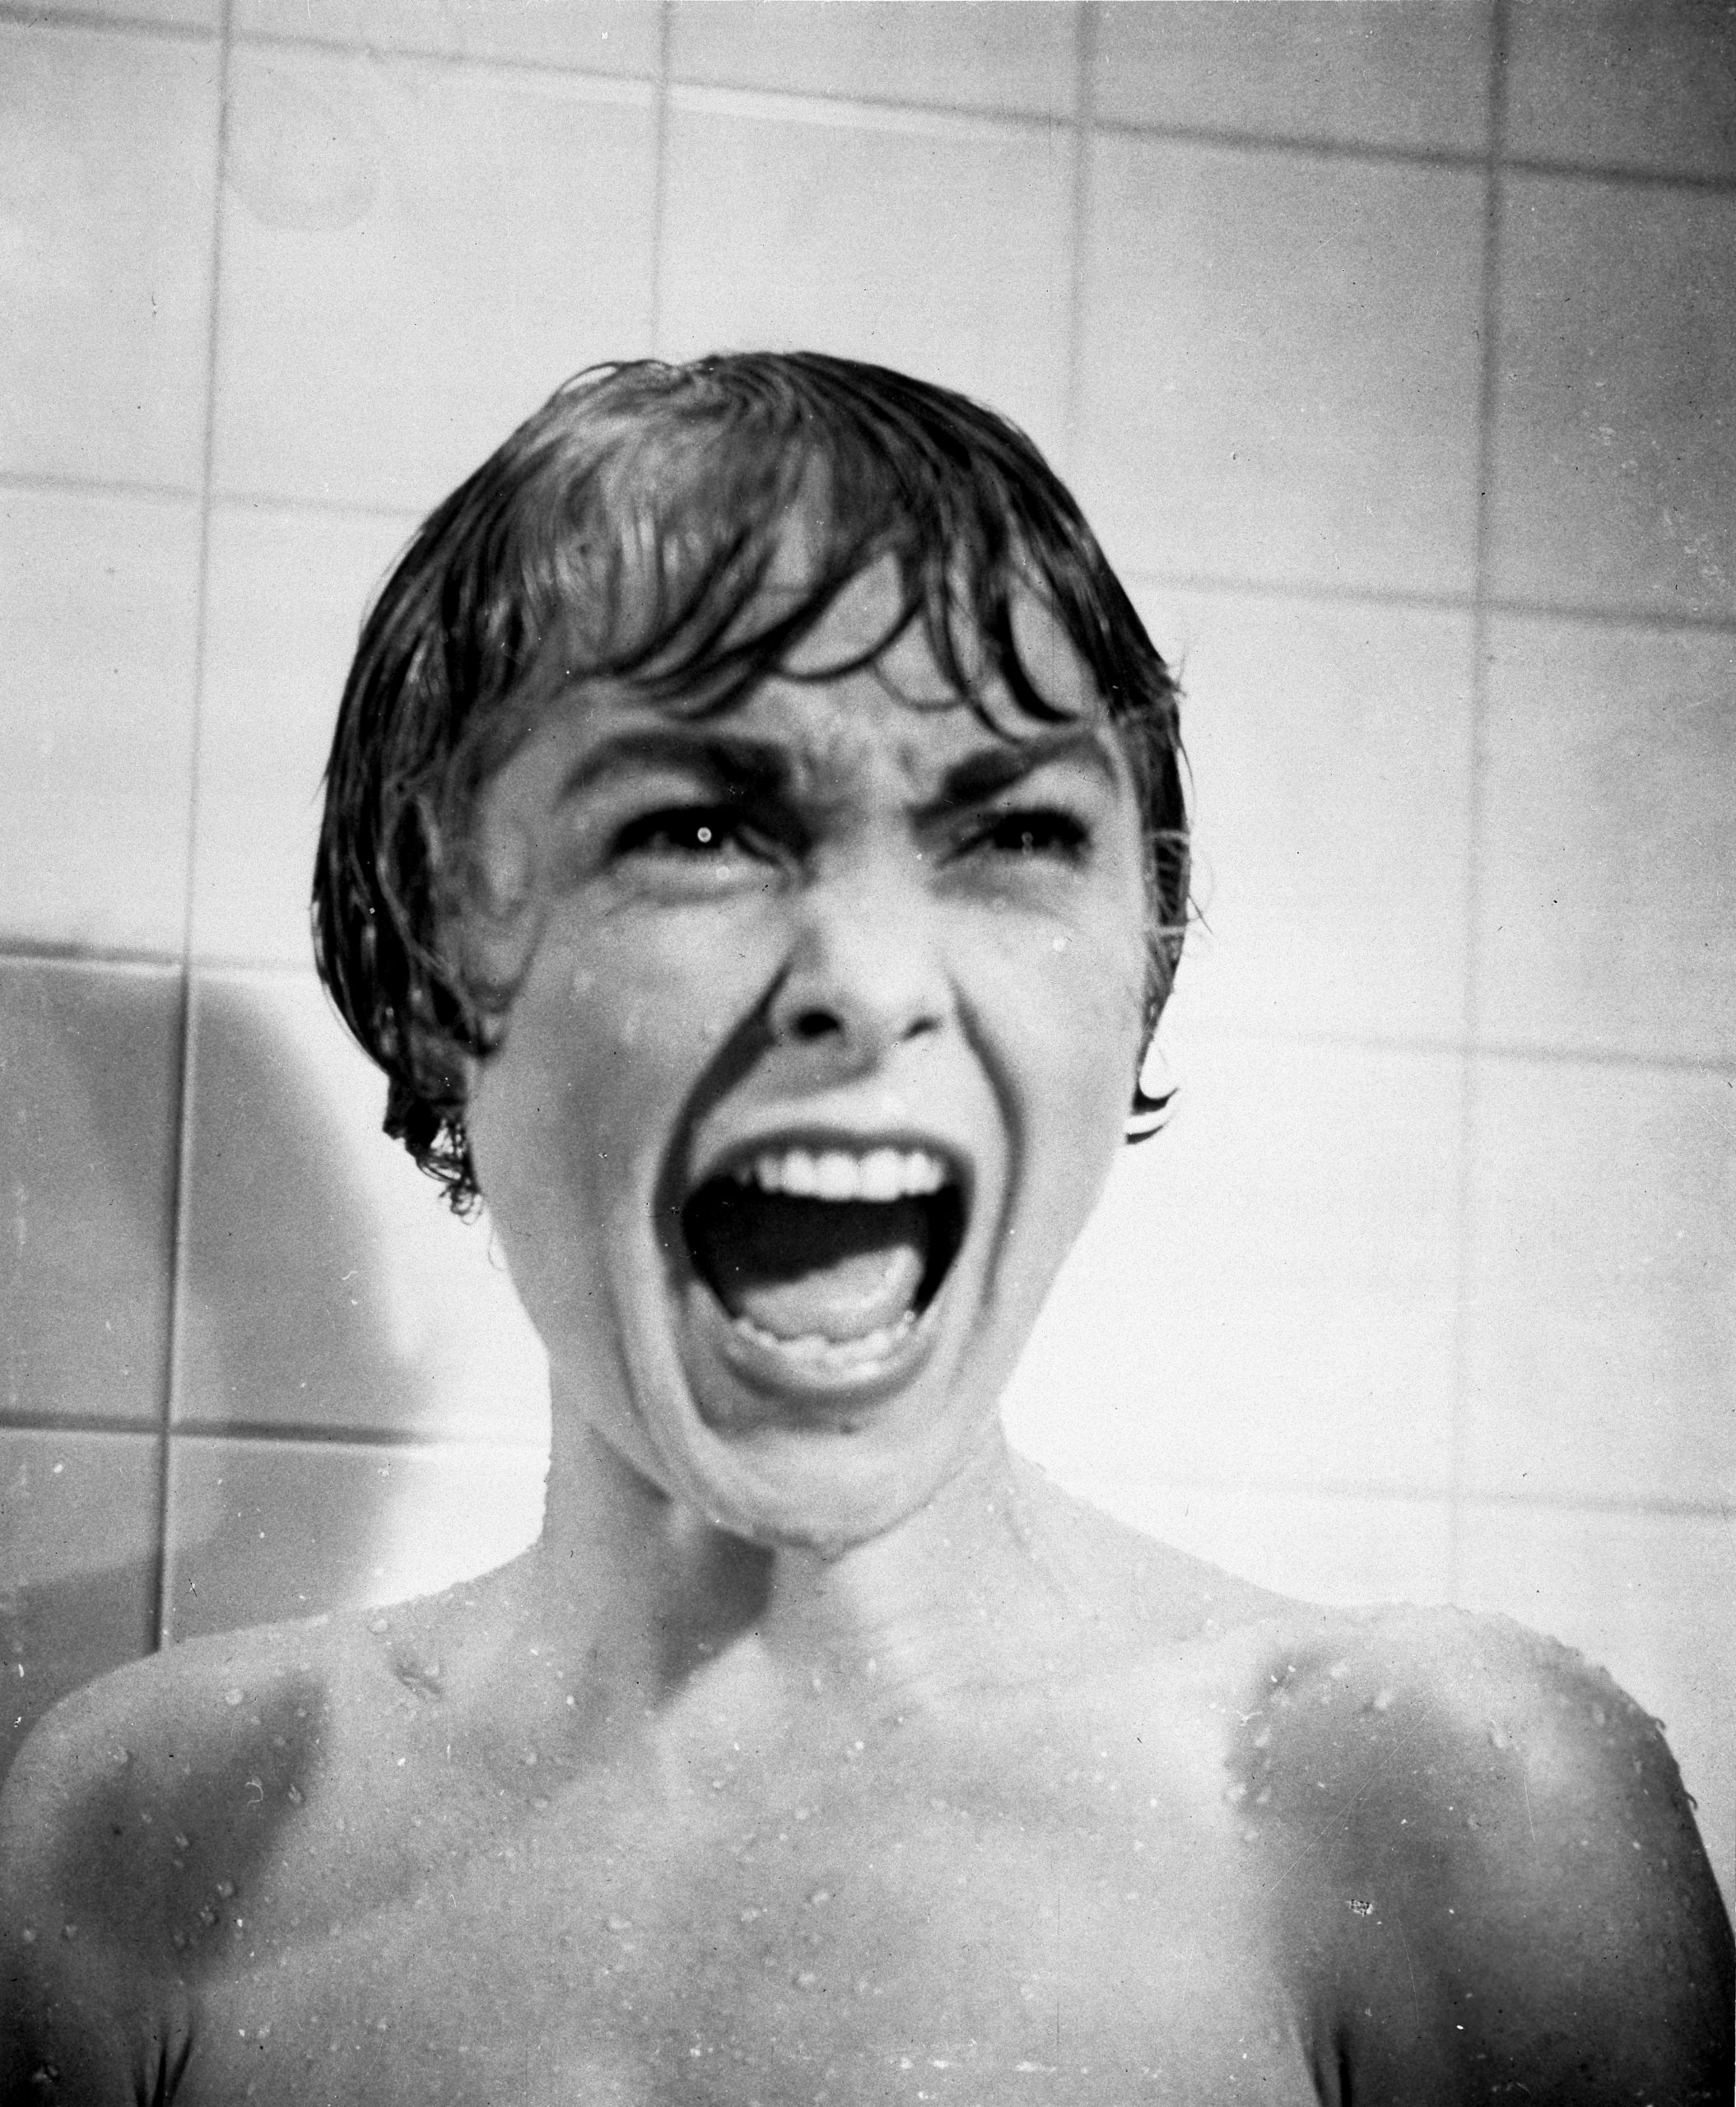 Hitchcock’s masterpiece, PSYCHO, will return to UK and Irish cinemas nationwide from 27th May